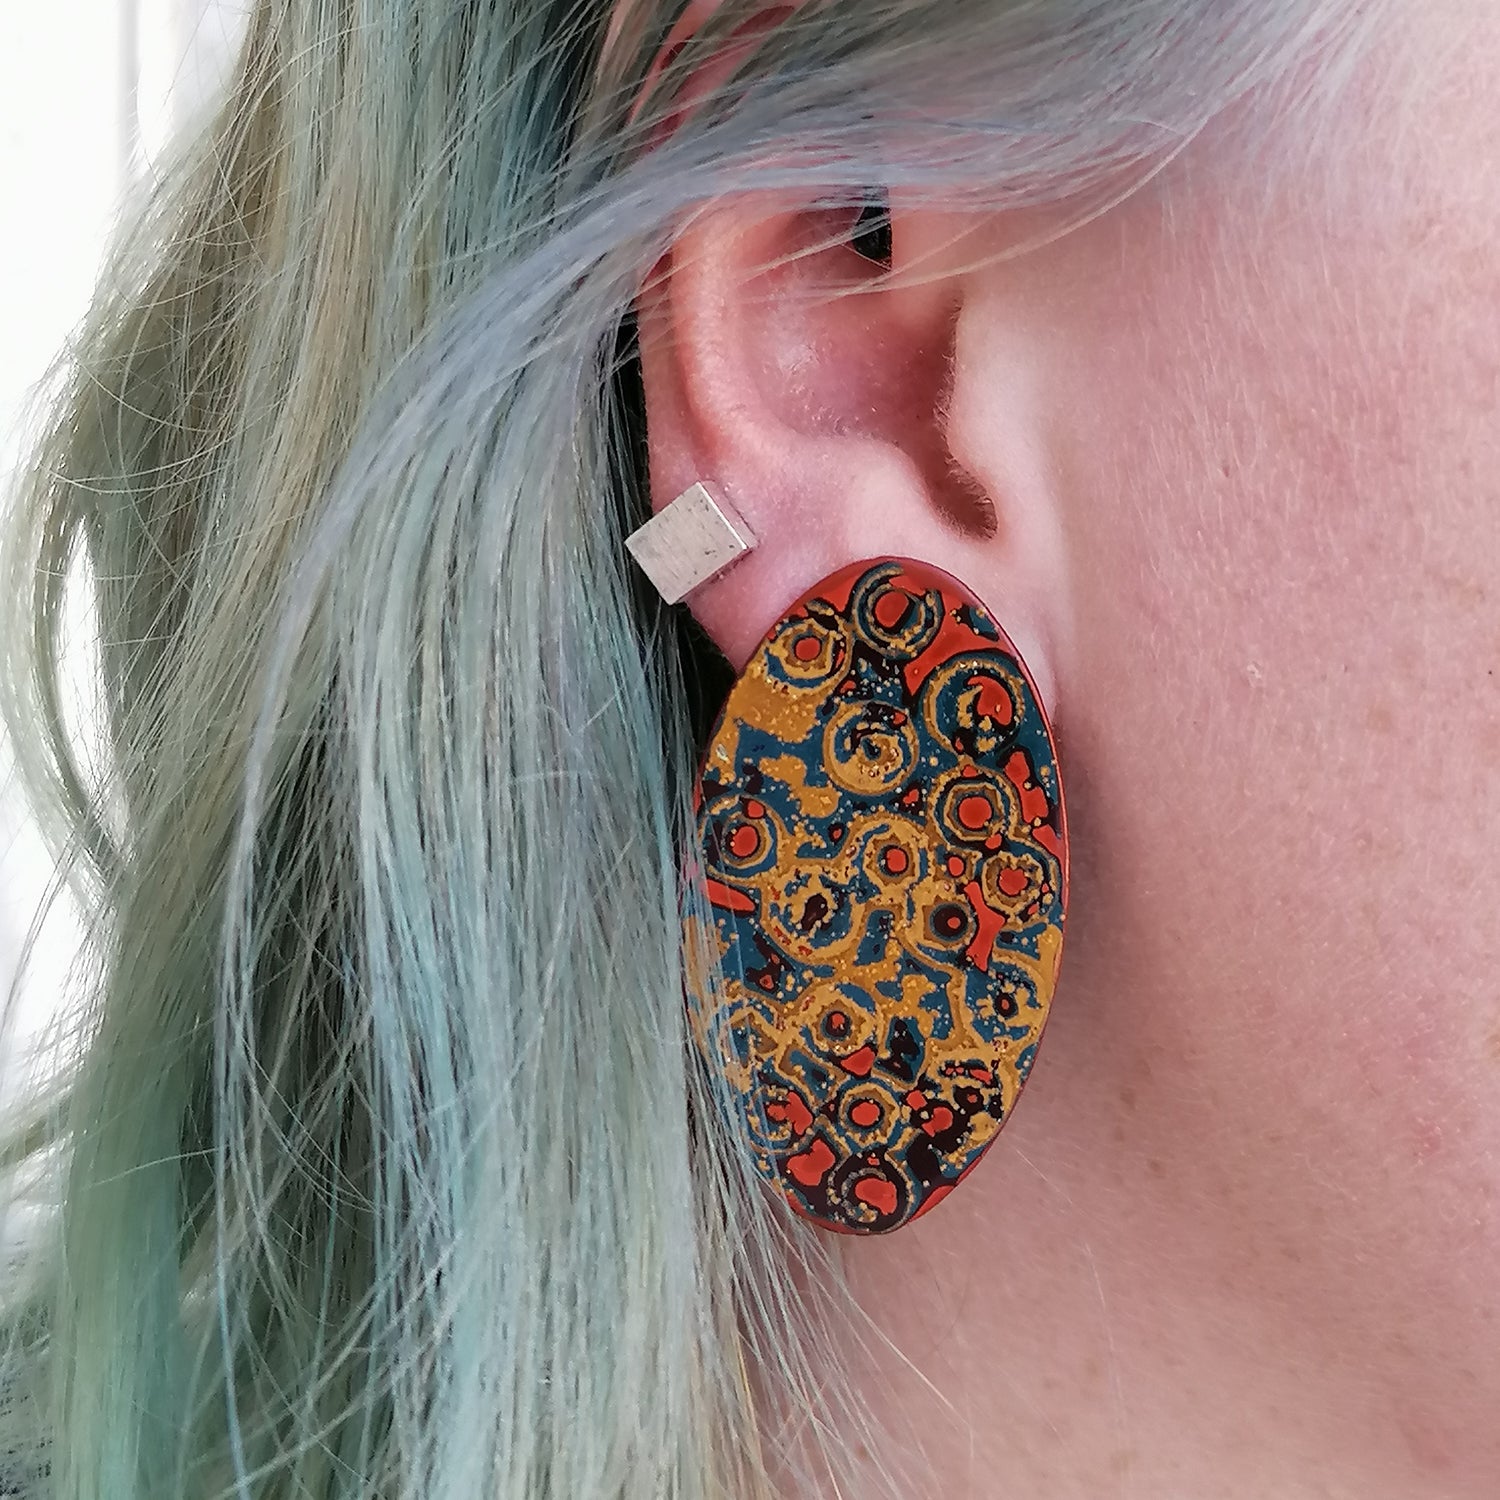 Image shows a long oval statement earring being worn by a blue haired model. The pattern consists of rings in yellow, blue and orange